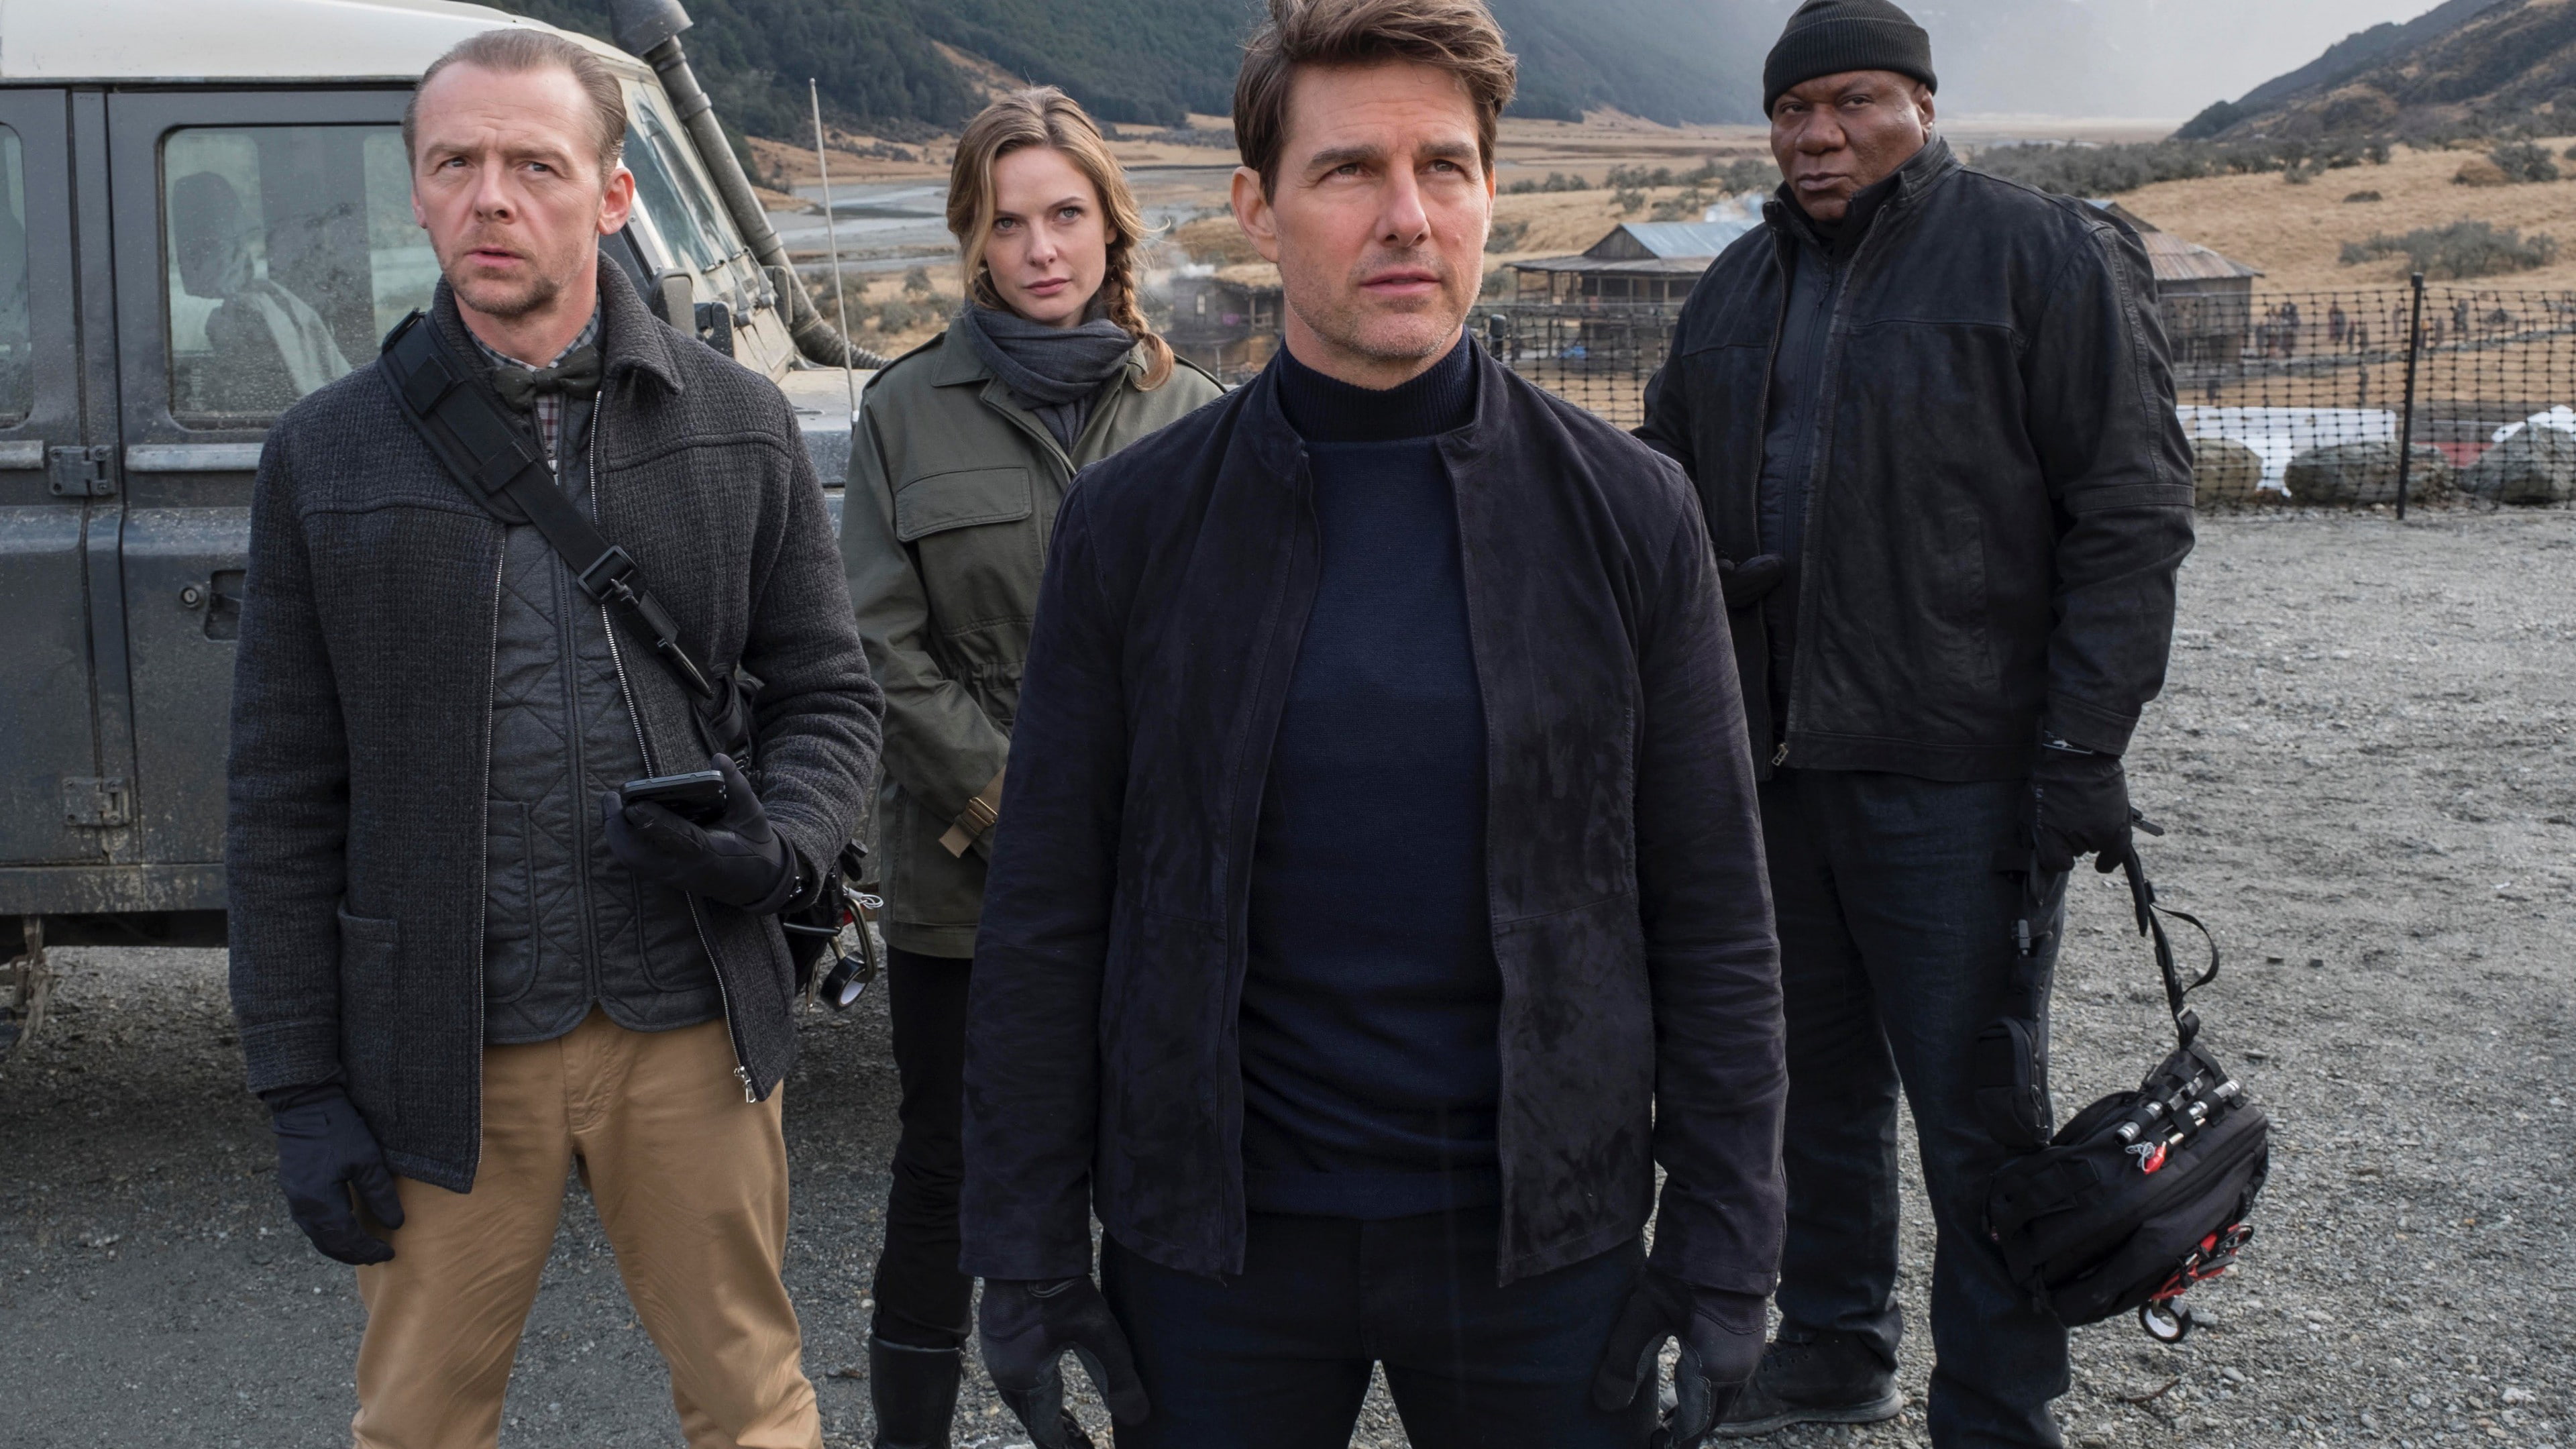 Mission Impossible movie scene, Mission: Impossible - Fallout